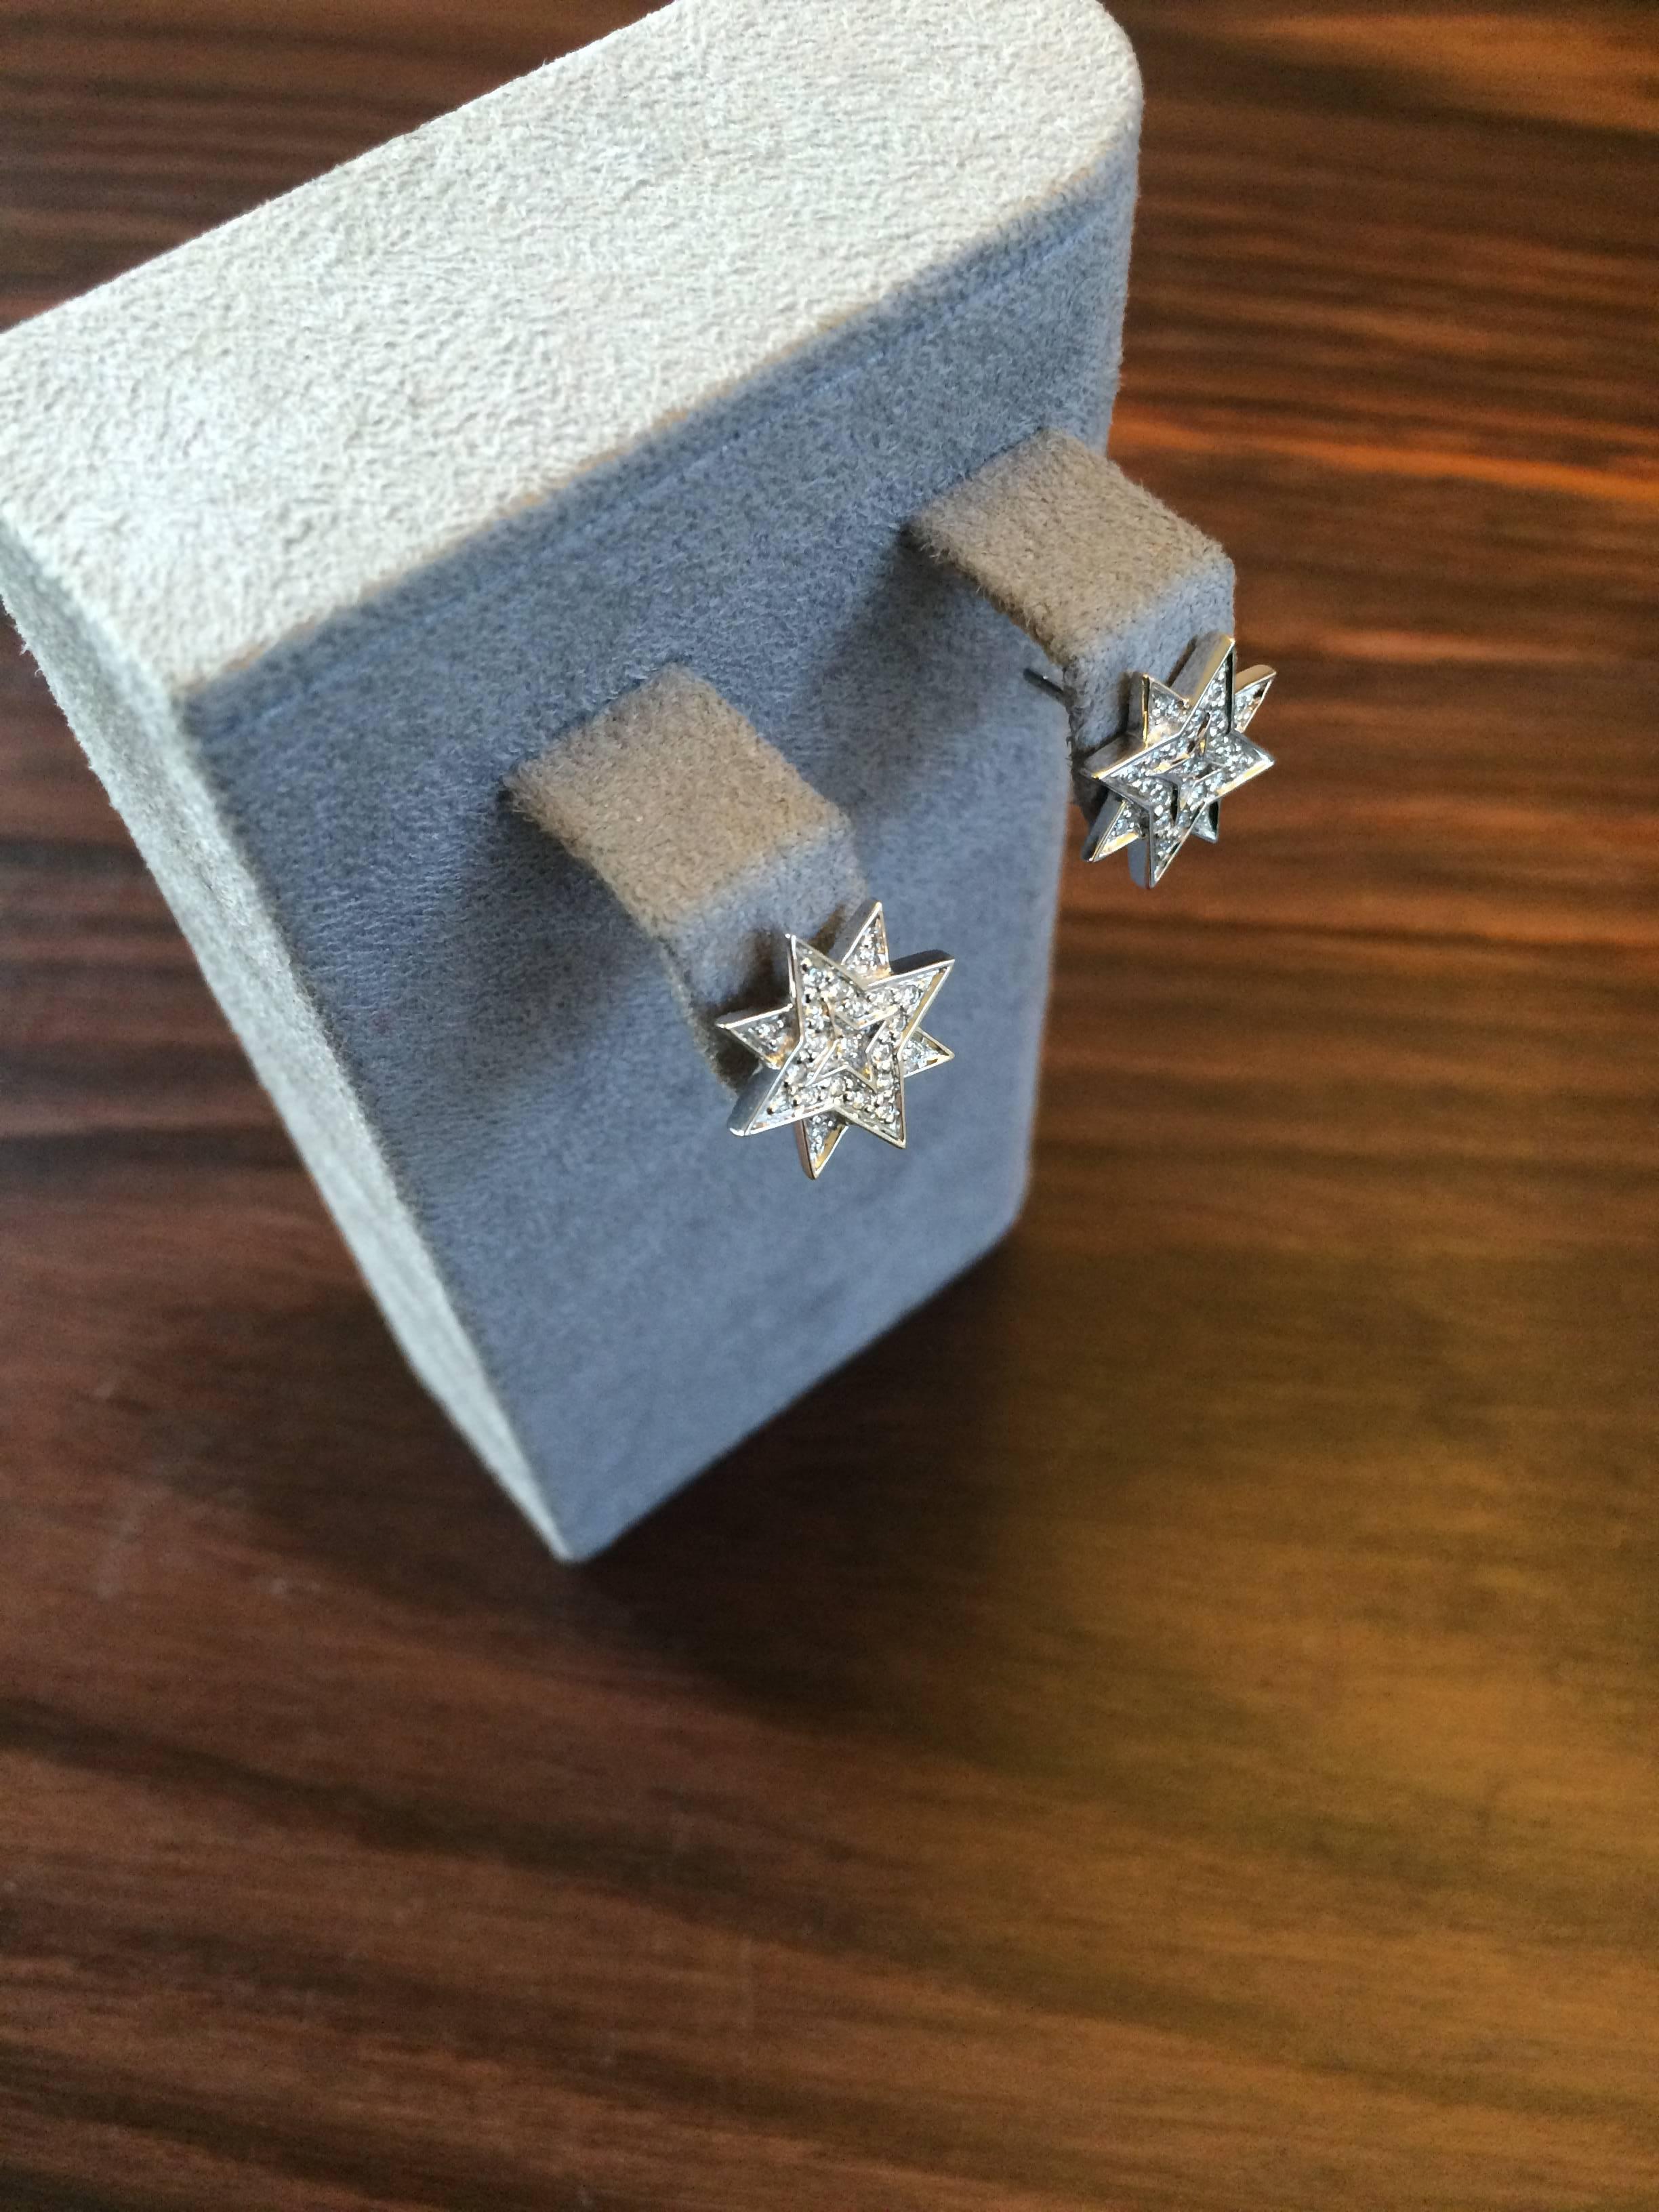 These beautiful star stud earrings are hand crafted from platinum in London and are pave set with white diamonds, totalling 0.30ct. They are f vs in quality. 

Diameter of star: 1.3cm
Studs for pierced ears

These stud earrings are a bespoke made to